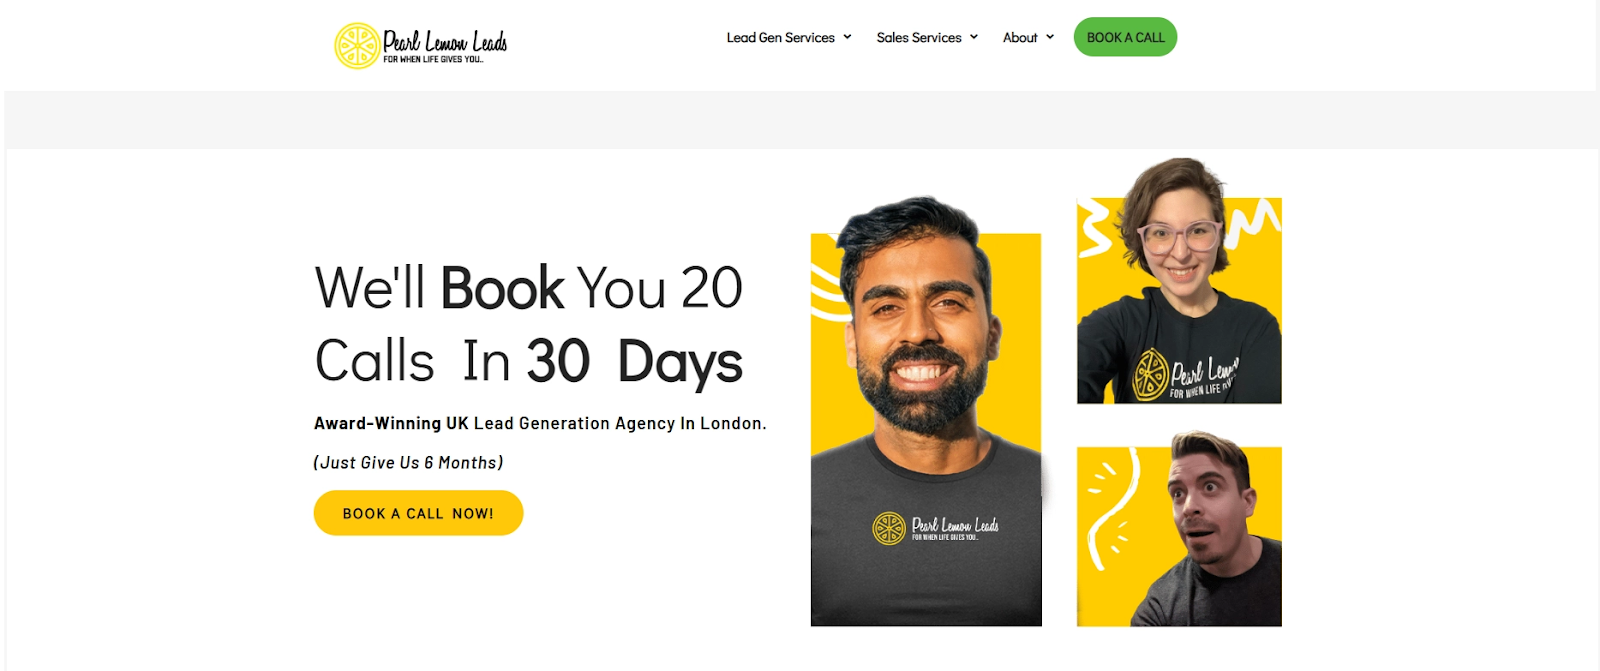 Top 10 Lead Generation Companies in the UK